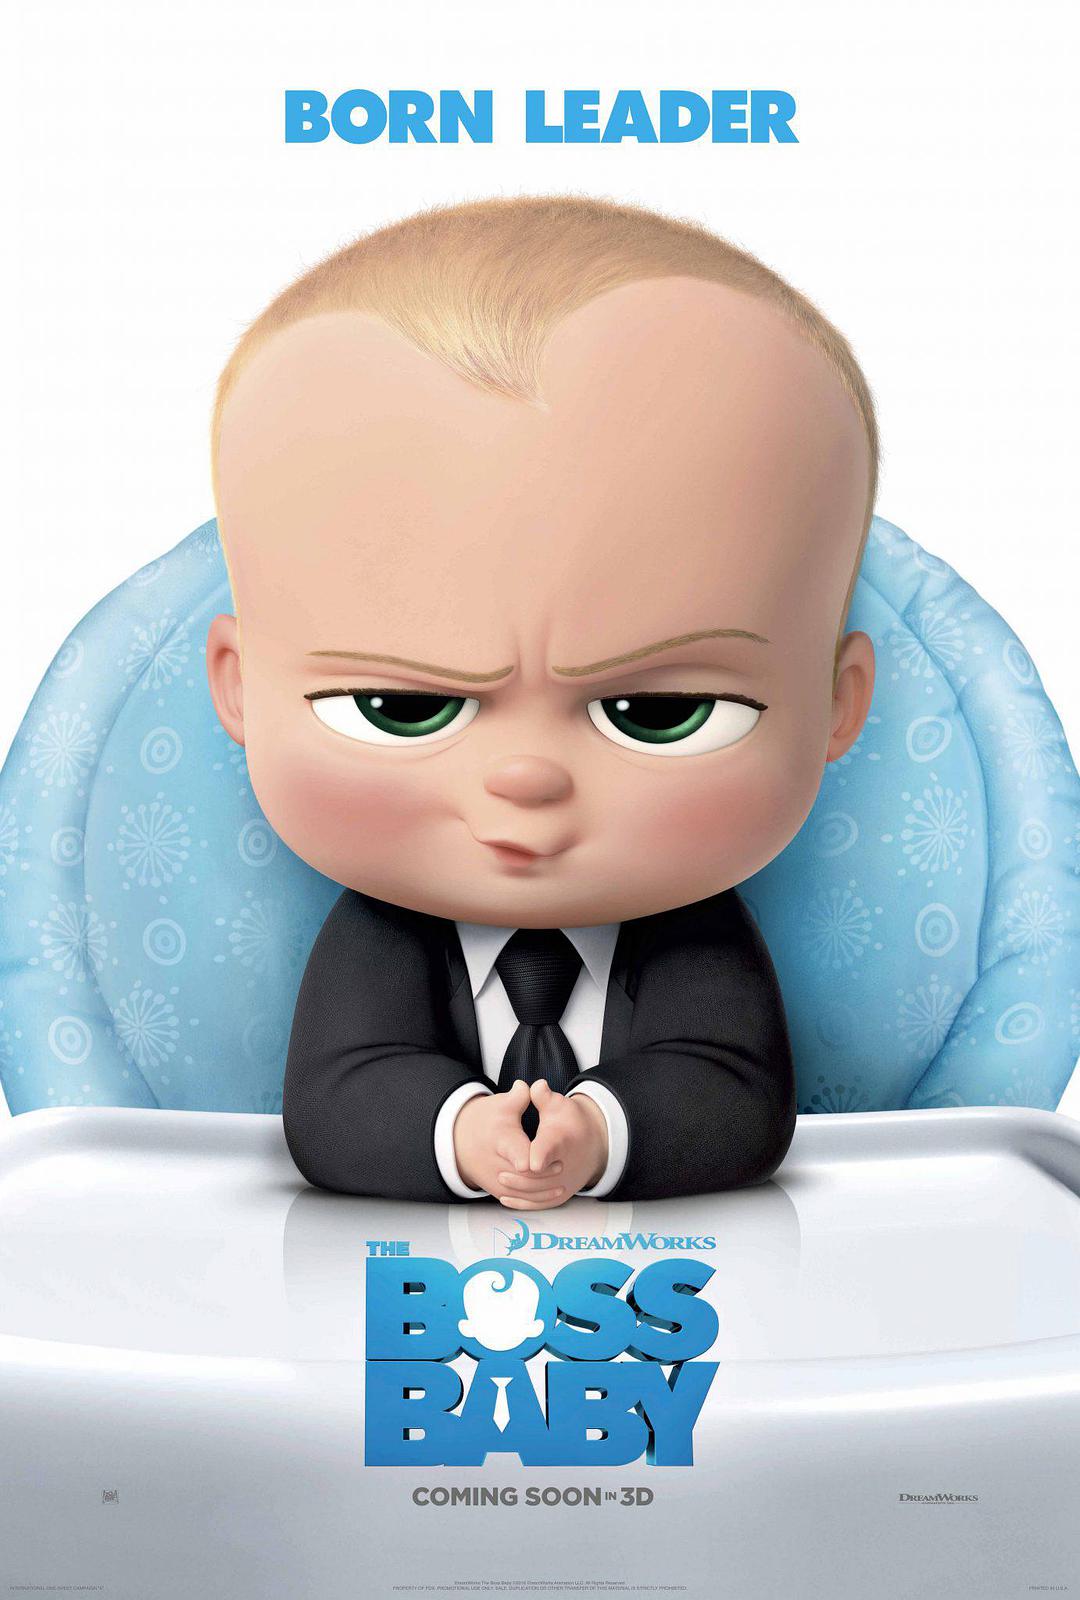 ϰ/ϰ The.Boss.Baby.2017.1080p.BluRay.x264.DTS-HD.MA.7.1-FGT 7.59GB-1.png